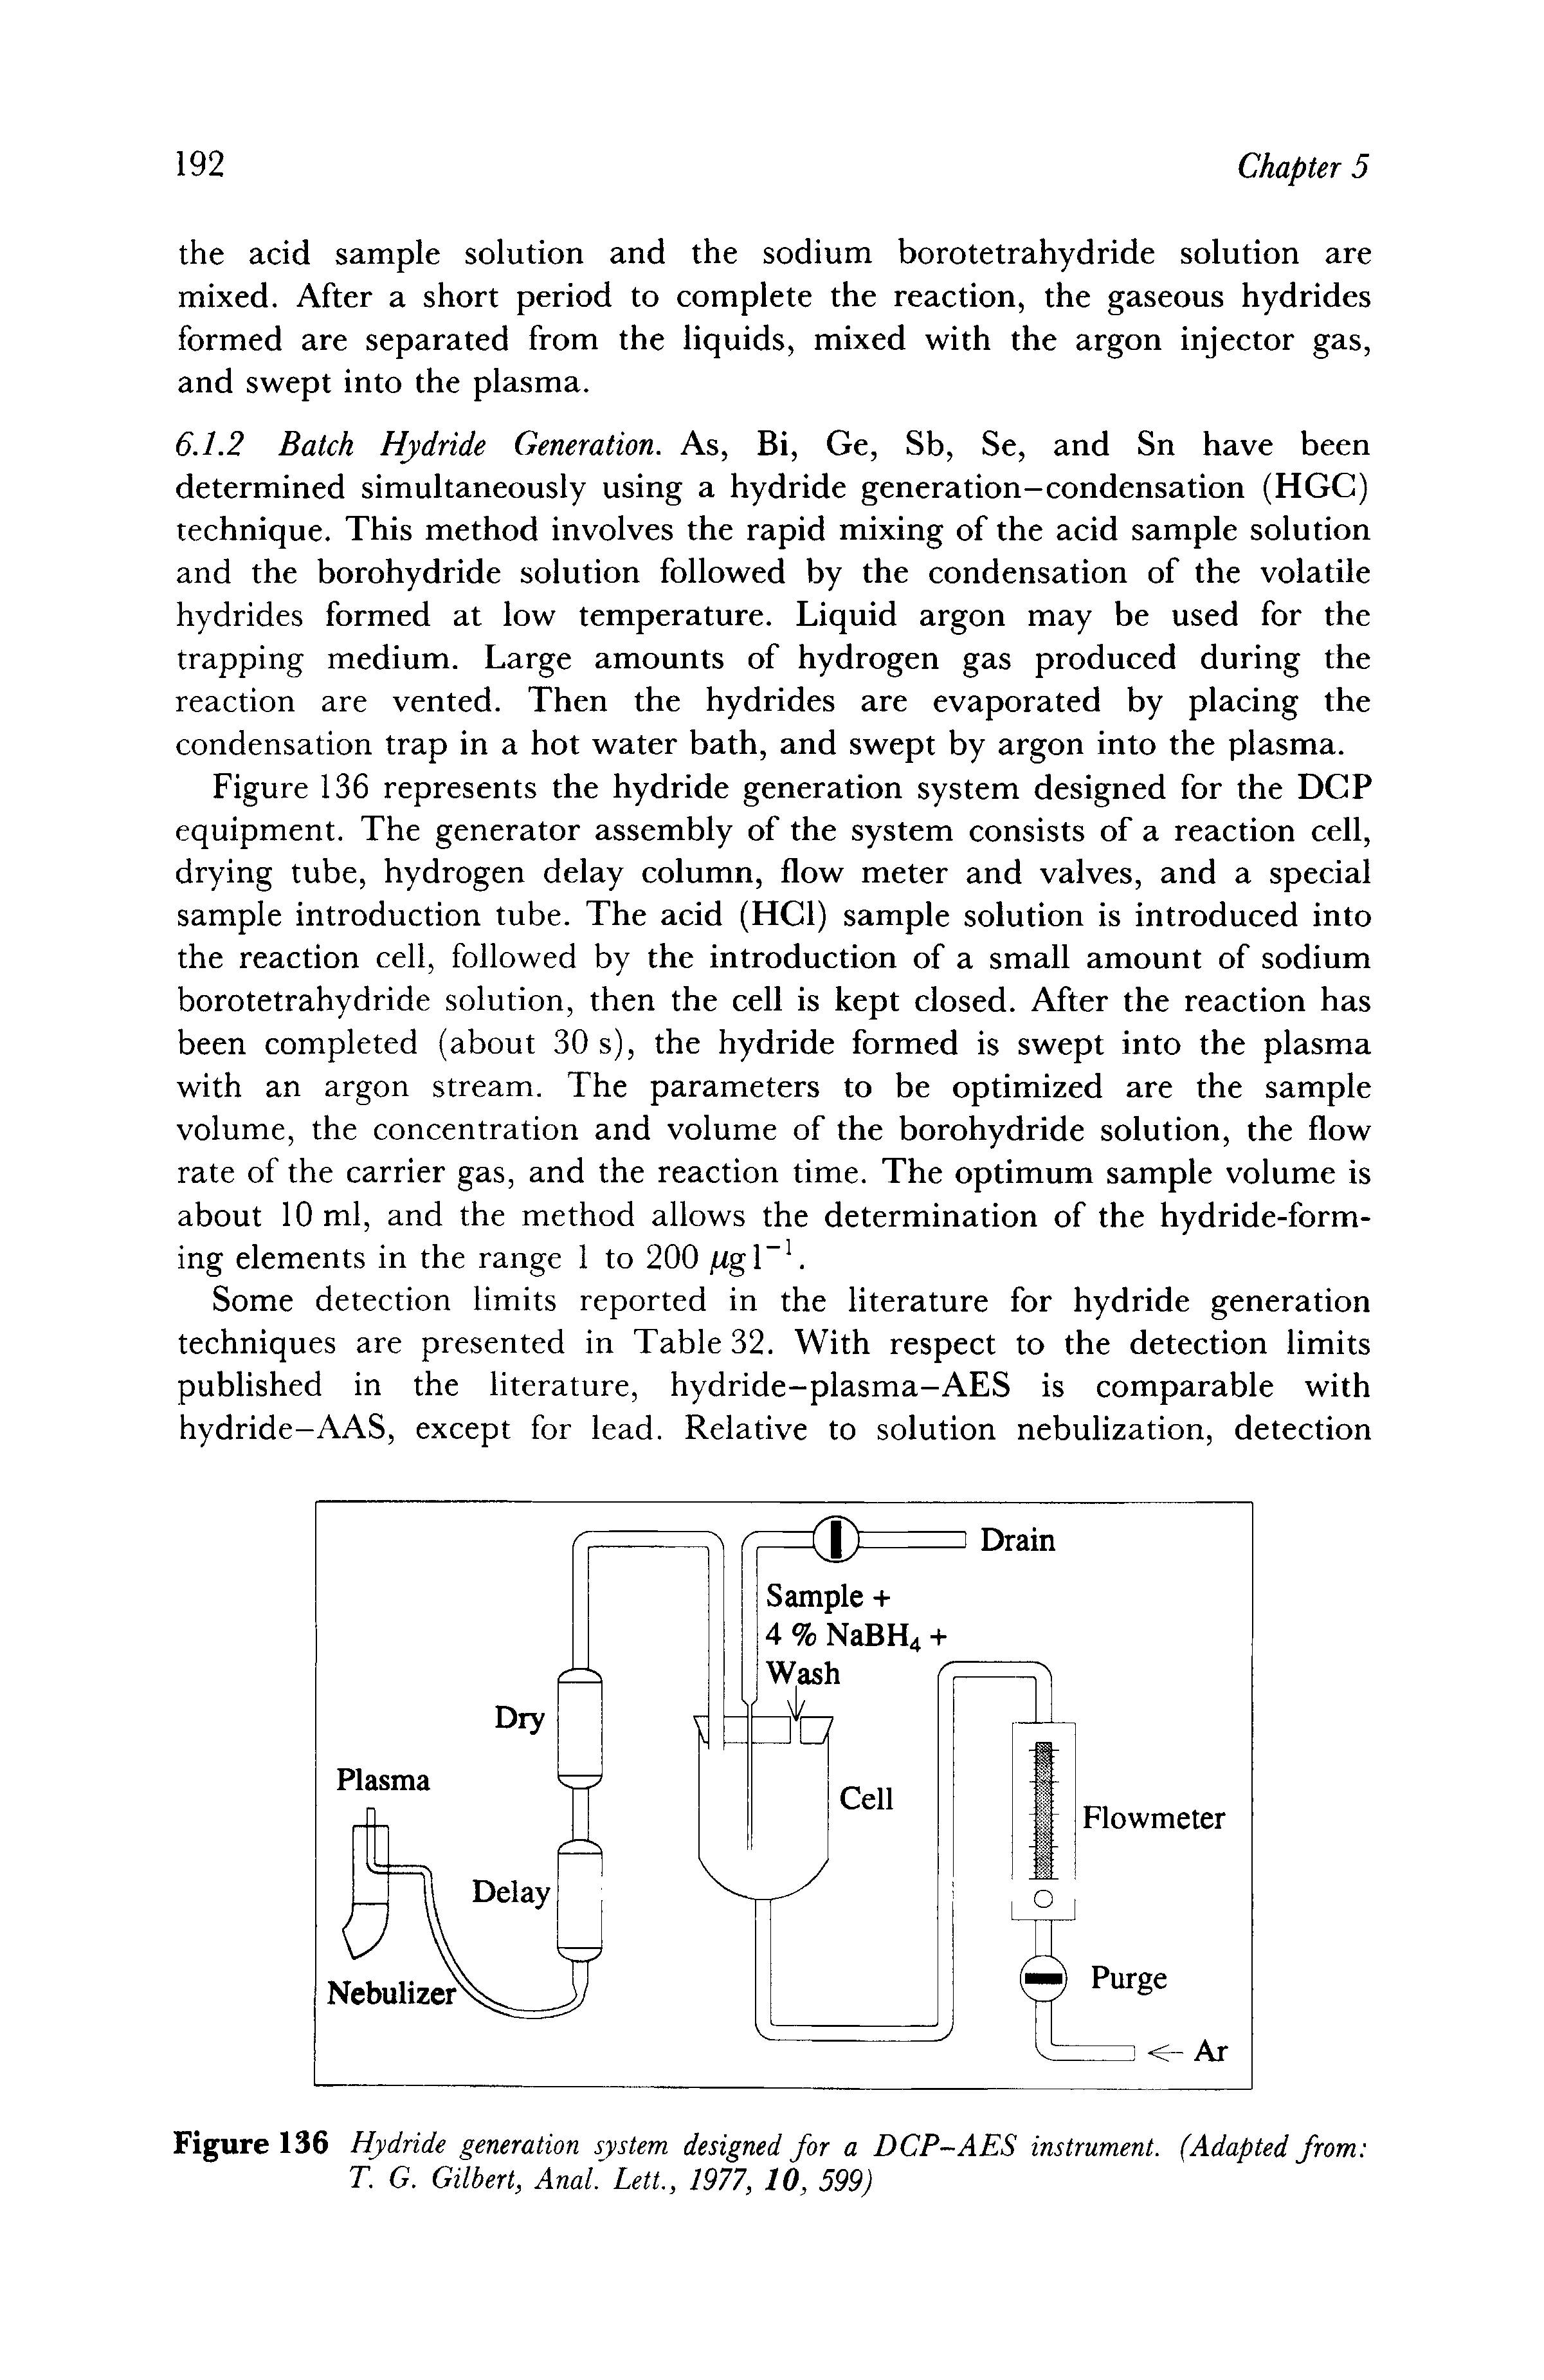 Figure 136 Hydride generation system designed for a DCP-AES instrument. (Adapted from T. G. Gilbert, Anal. Lett., 1977, 10, 599)...